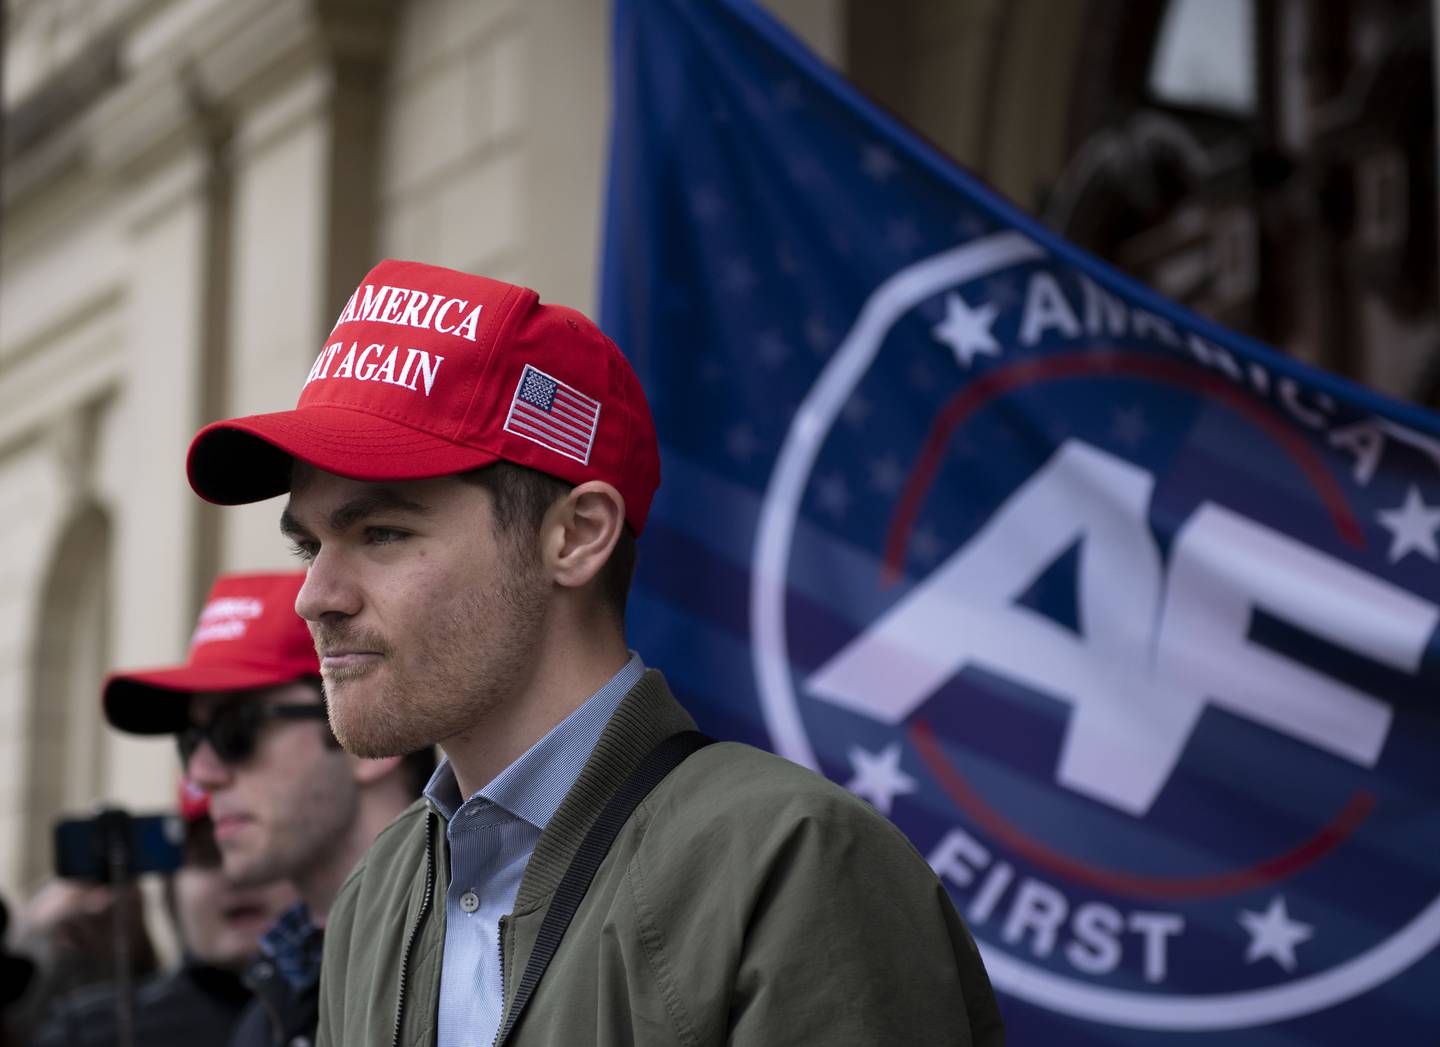 Nick Fuentes, a white supremacist and Holocaust denier, holds a rally in Lansing, Michigan, in 2020. AP